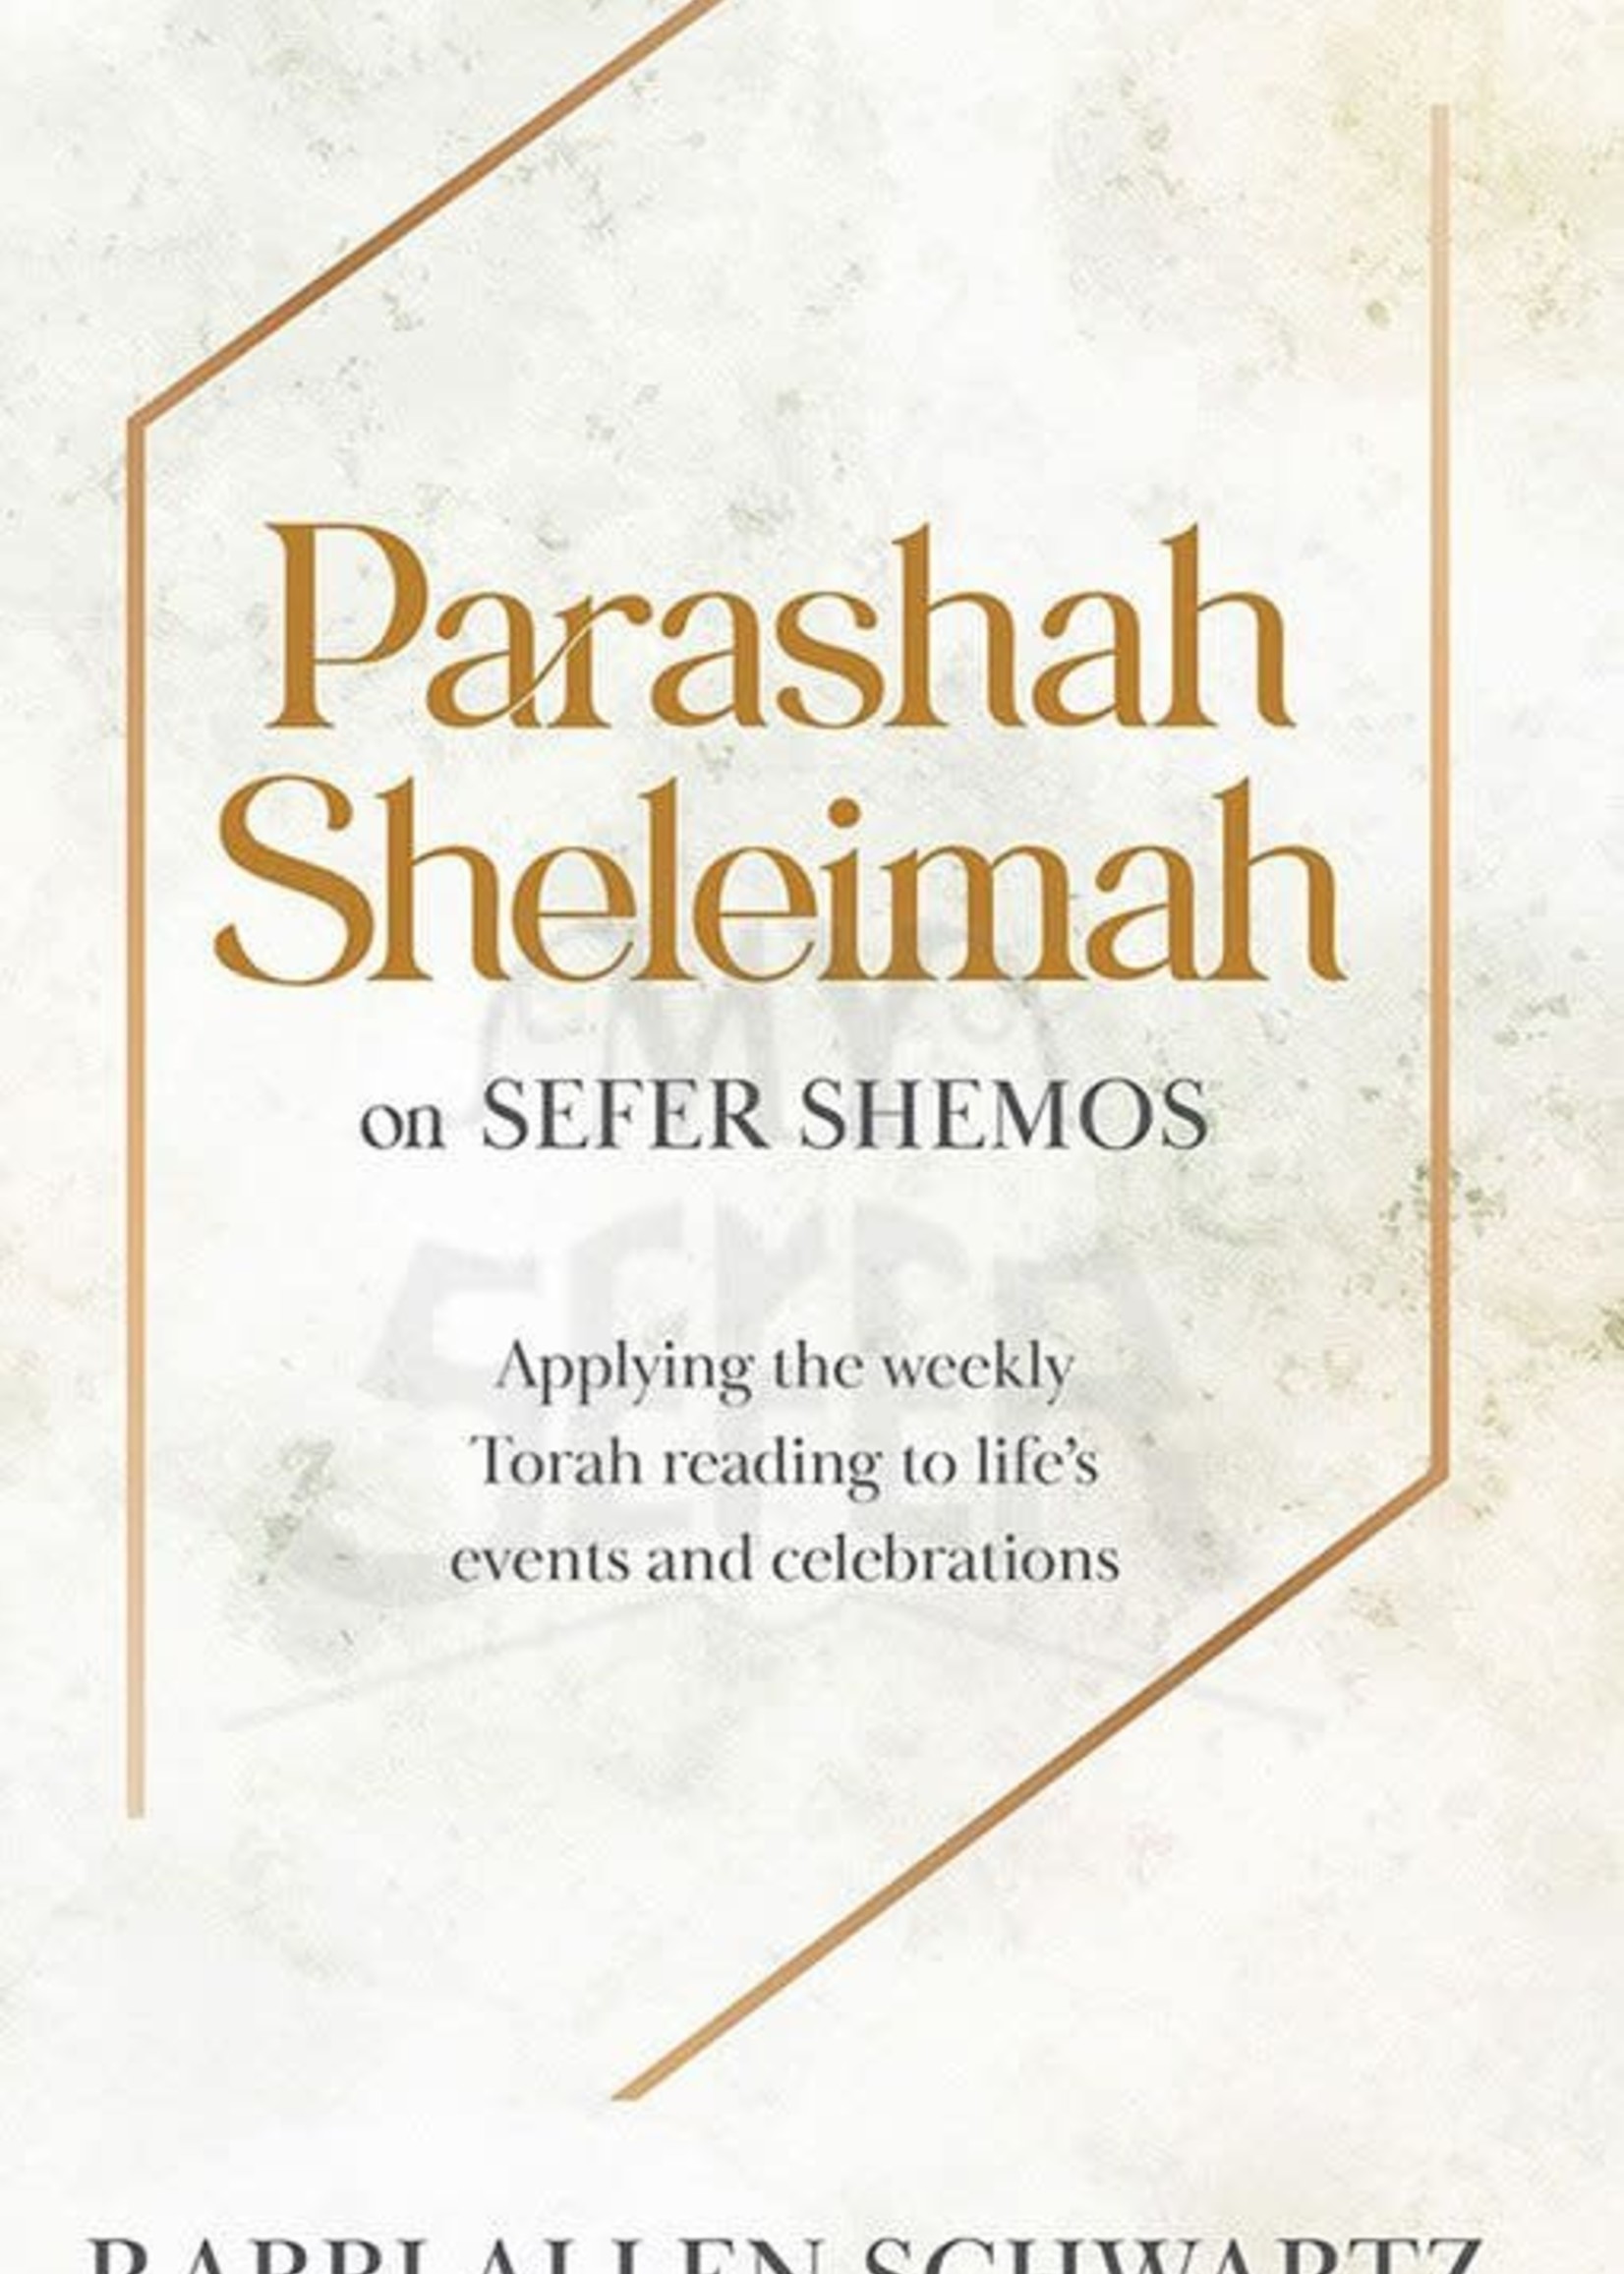 Parashah Sheleimah on Sefer Shemos - Applying The Weekly Torah Reading To Life's Events And Celebrations